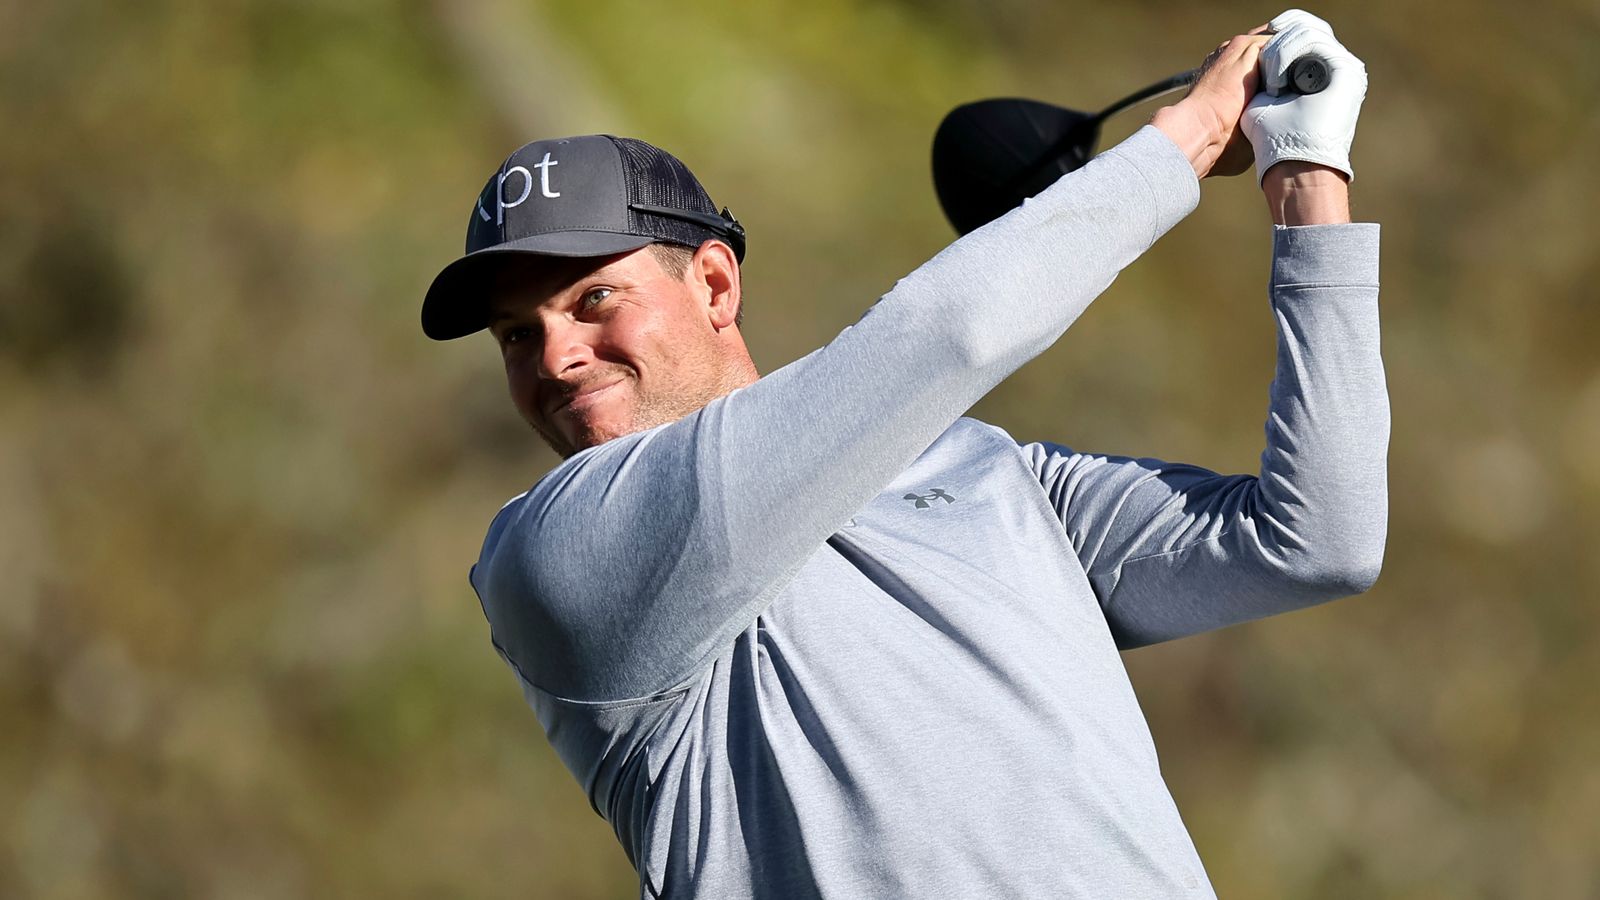 Adam Schenk holds lead with Tommy Fleetwood two shots behind after second round at Valspar Championship